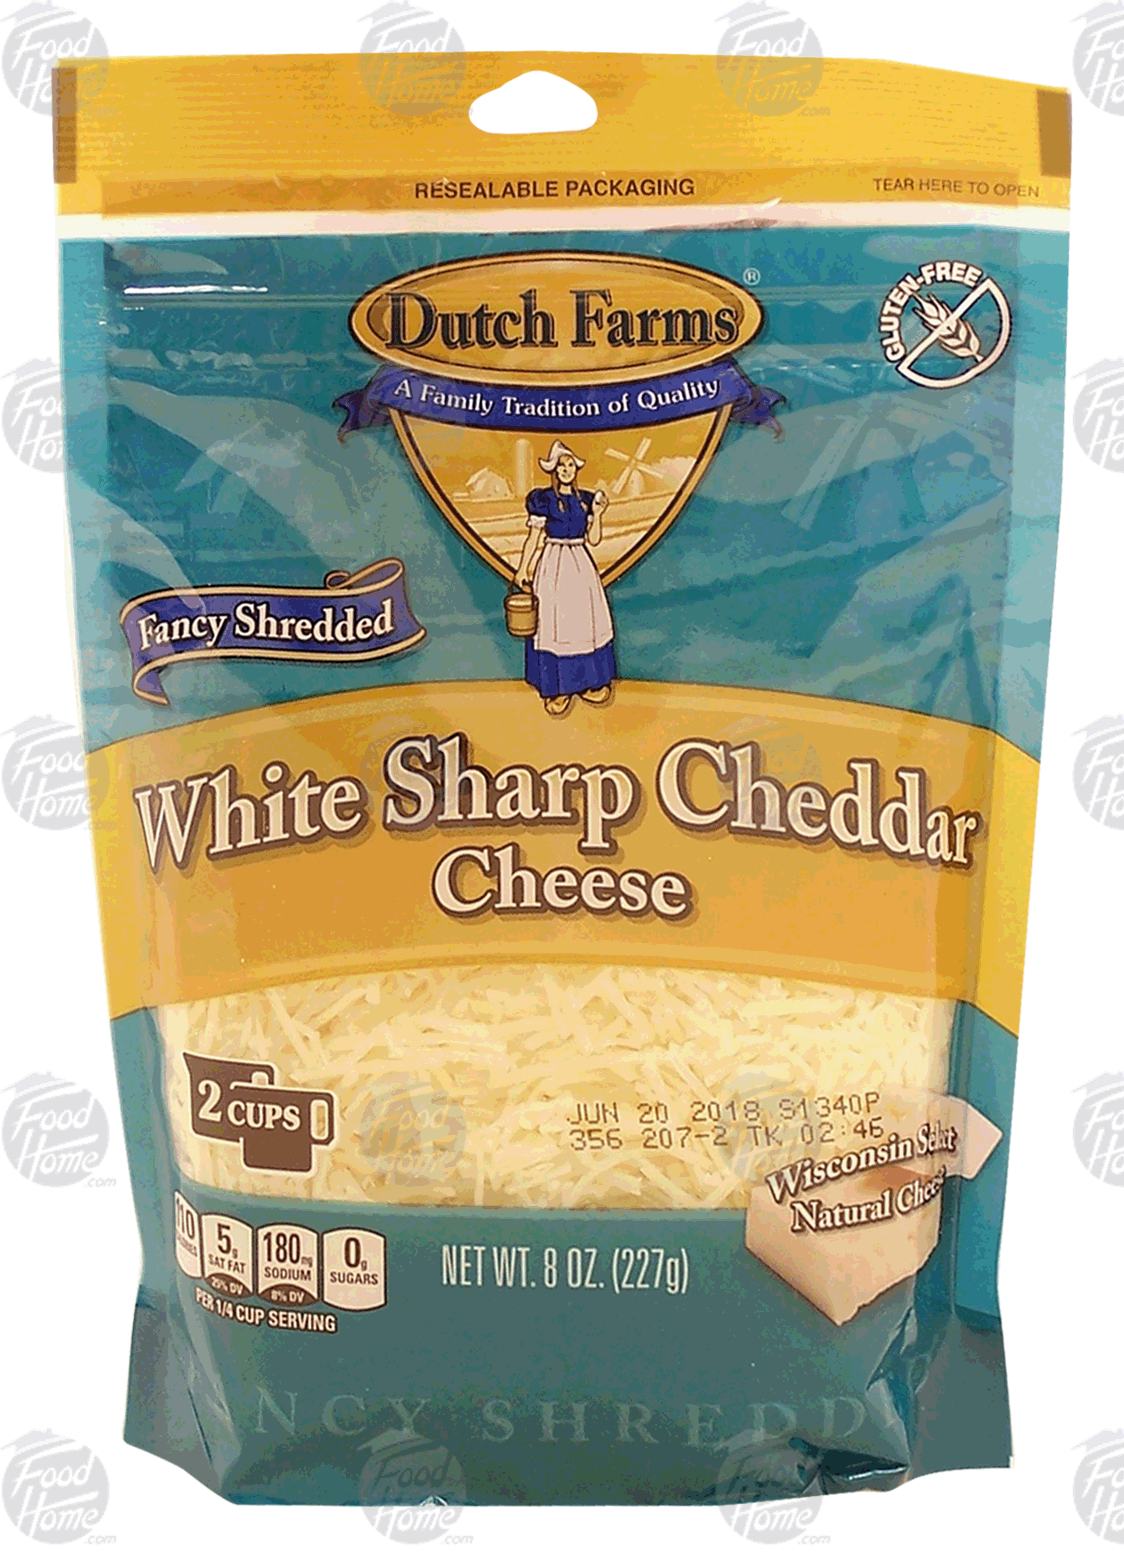 Dutch Farms Fancy Shredded white sharp cheddar cheese Full-Size Picture